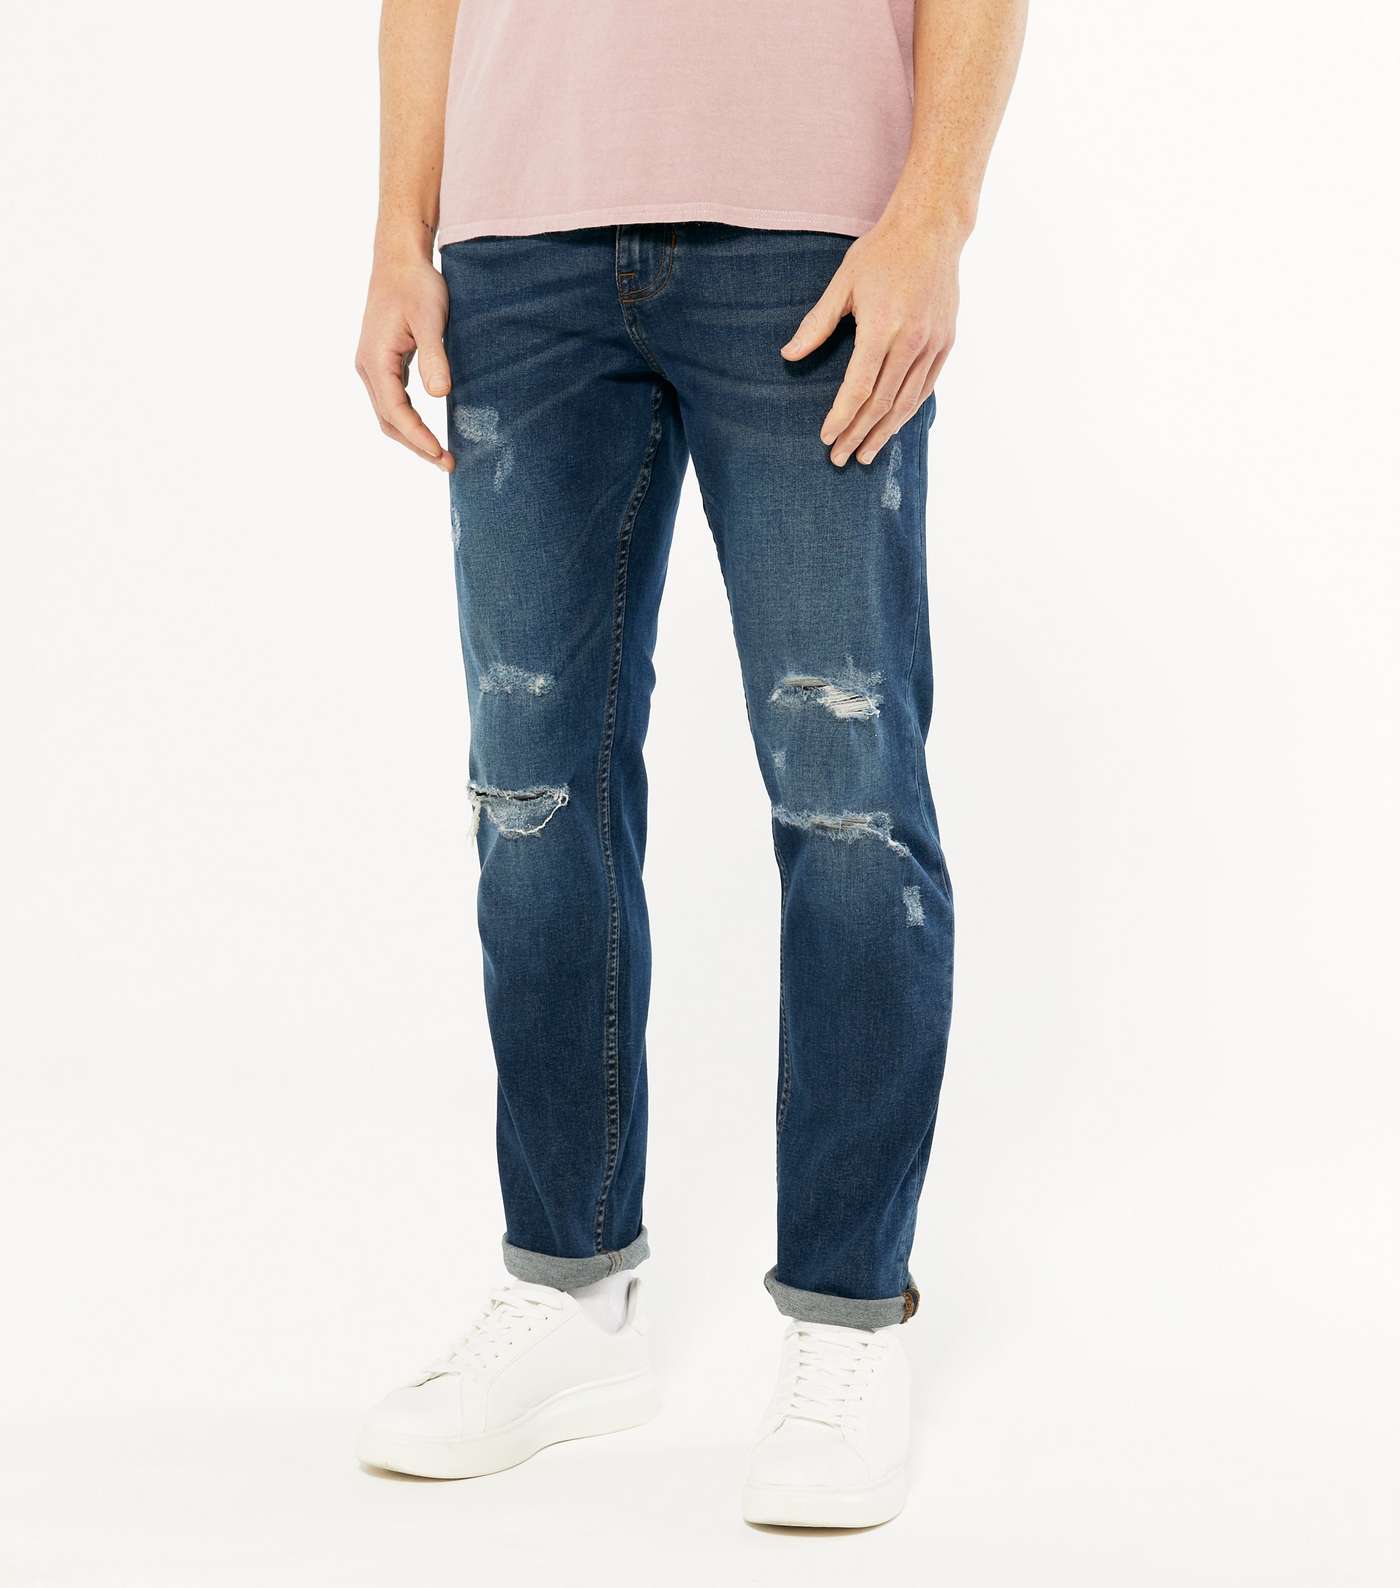 Blue Rinse Wash Ripped Slim Stretch Jeans Image 2